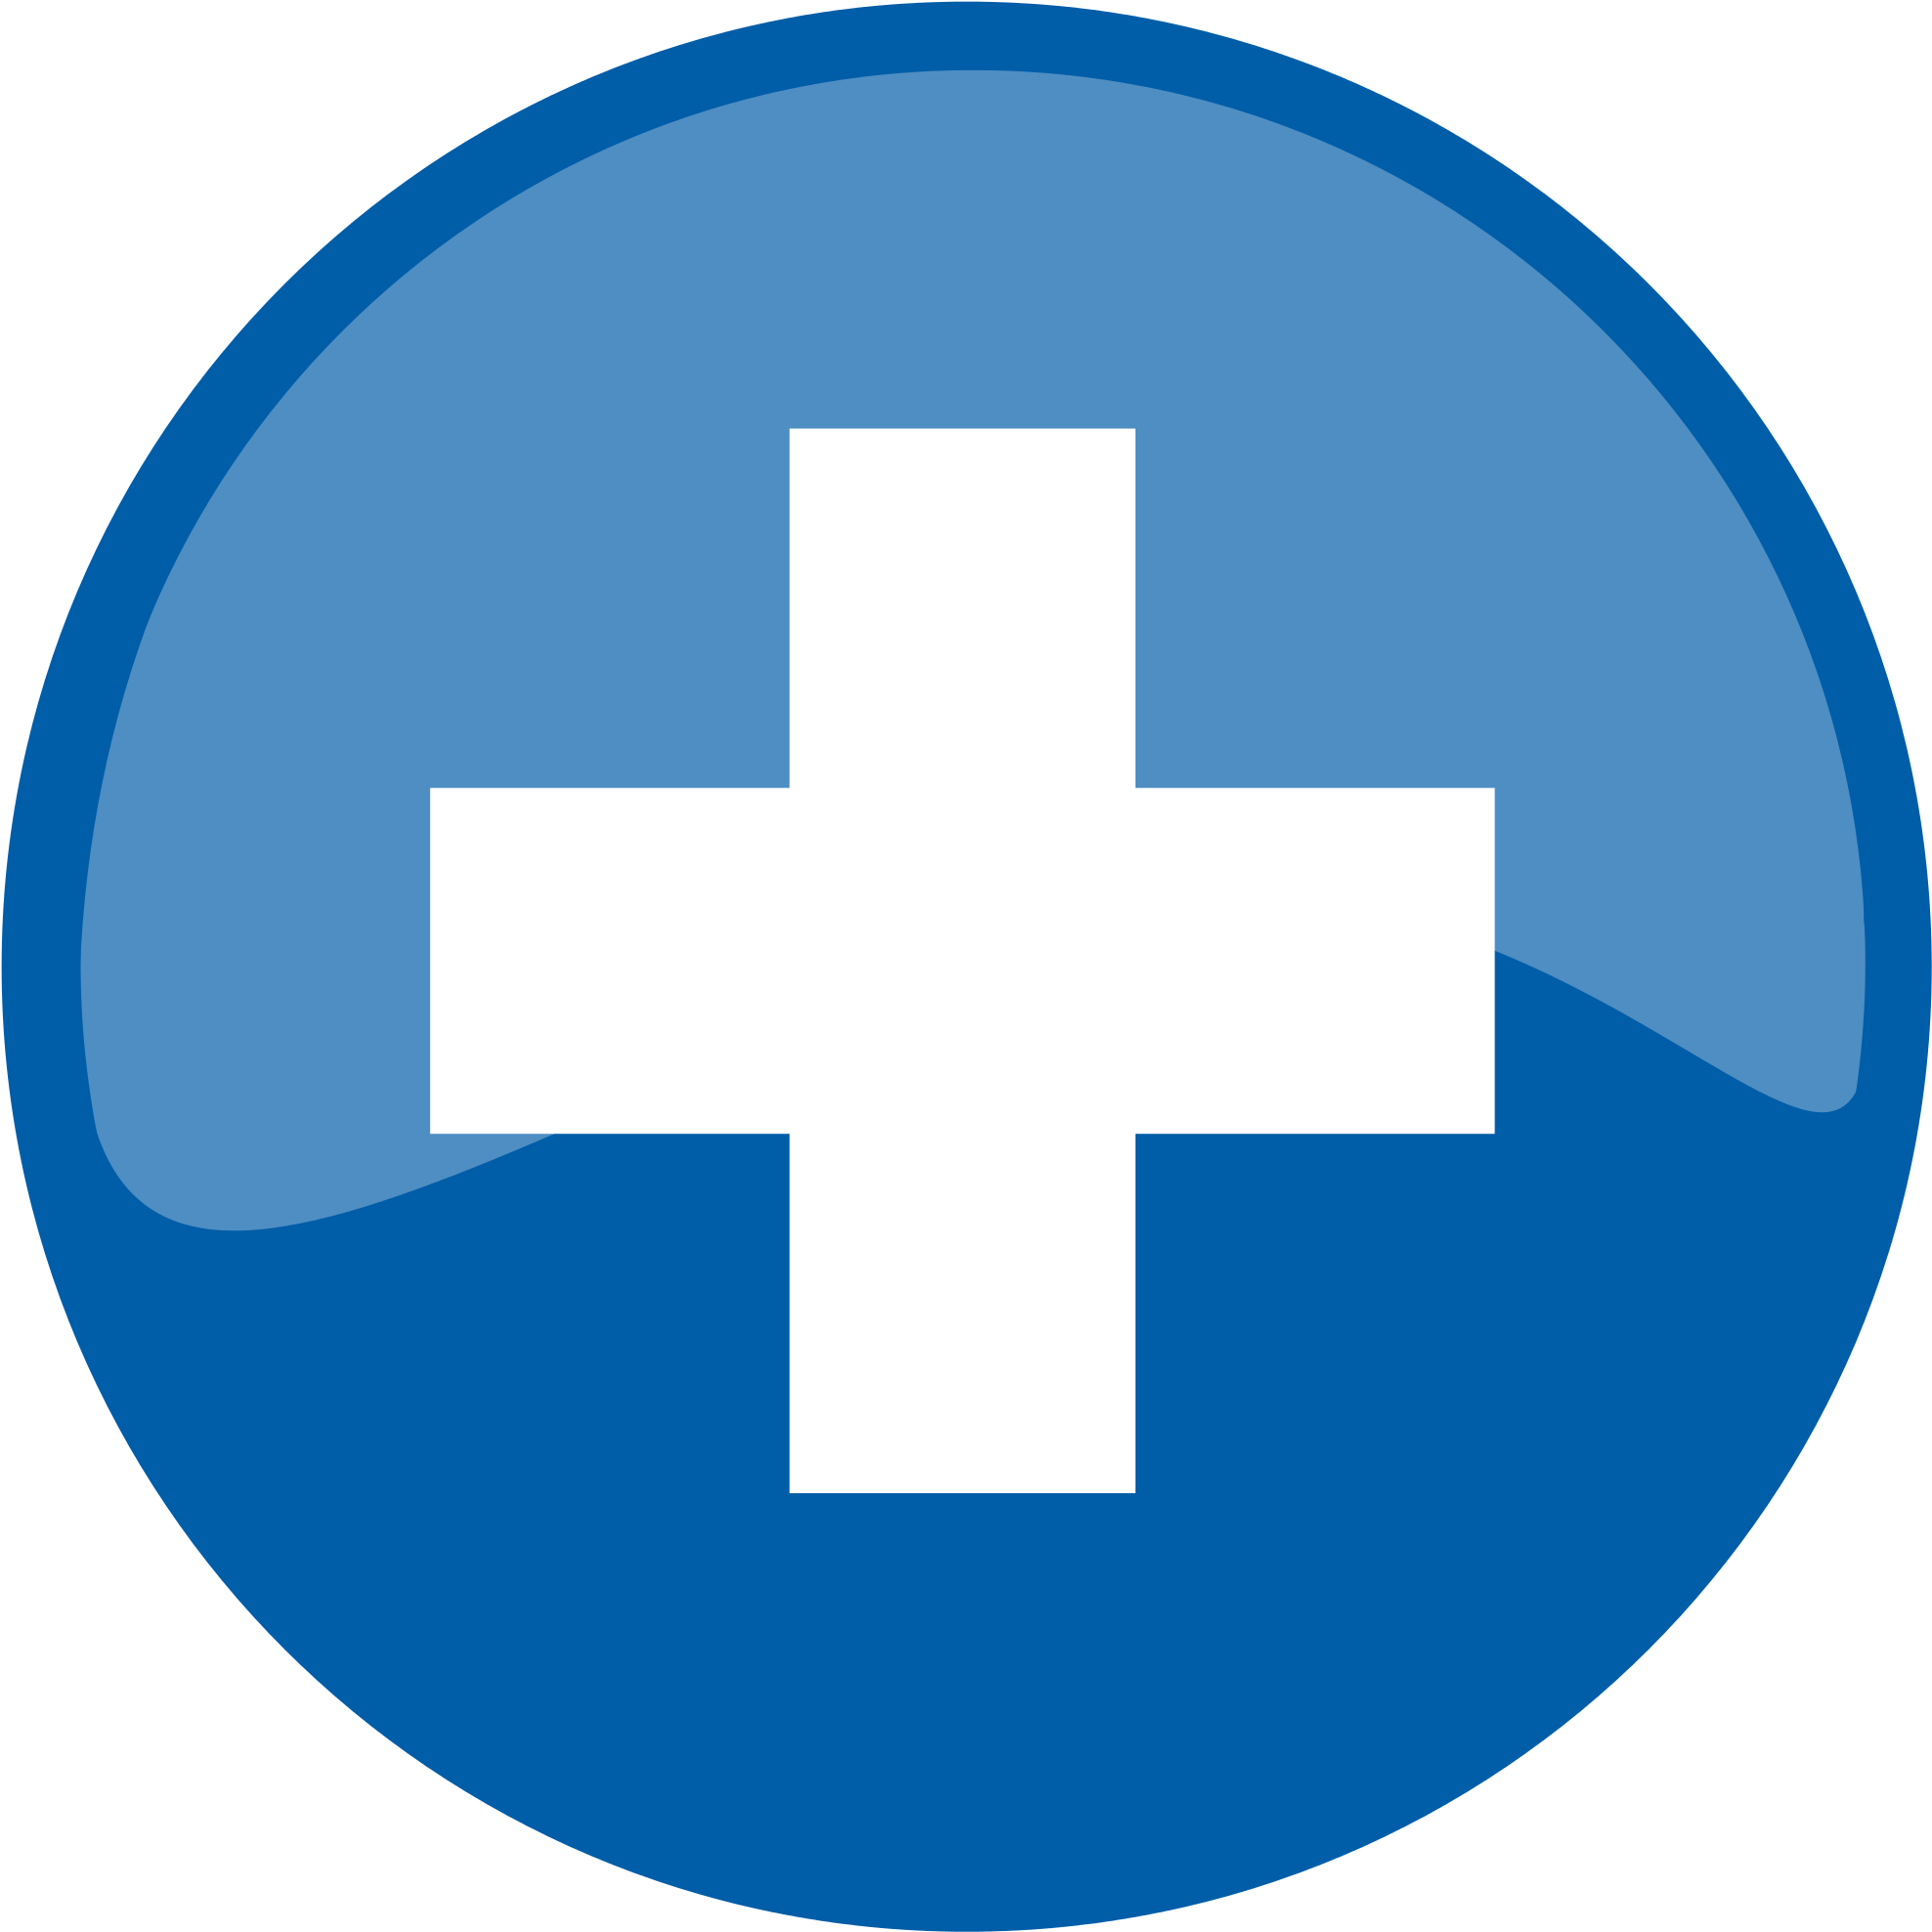 A Blue Circle With A White Cross